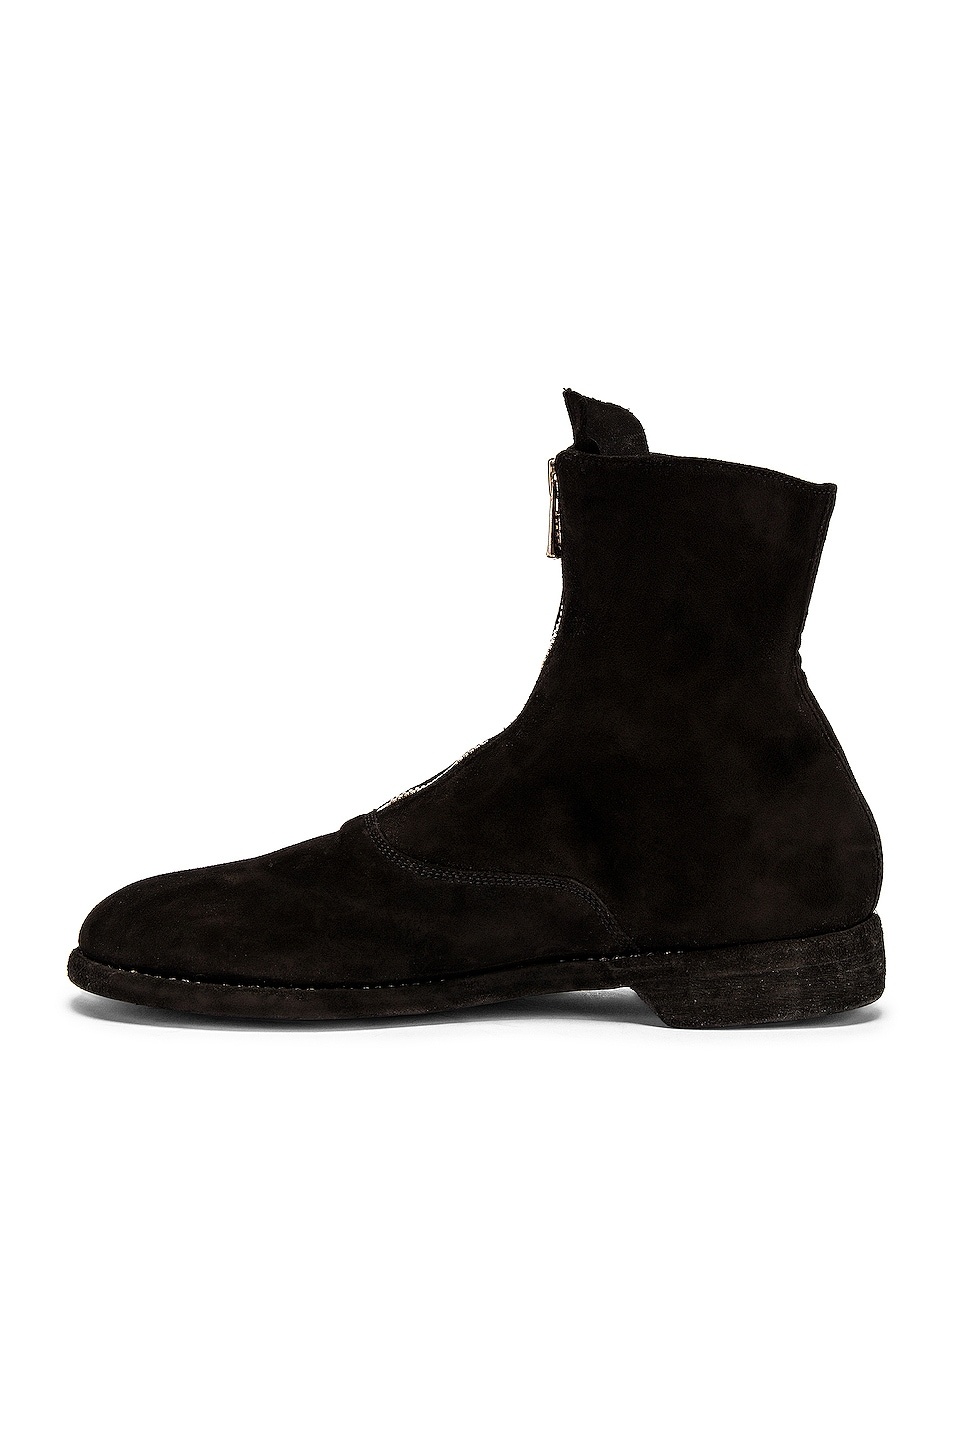 Stag Suede Zipper Boots - 5